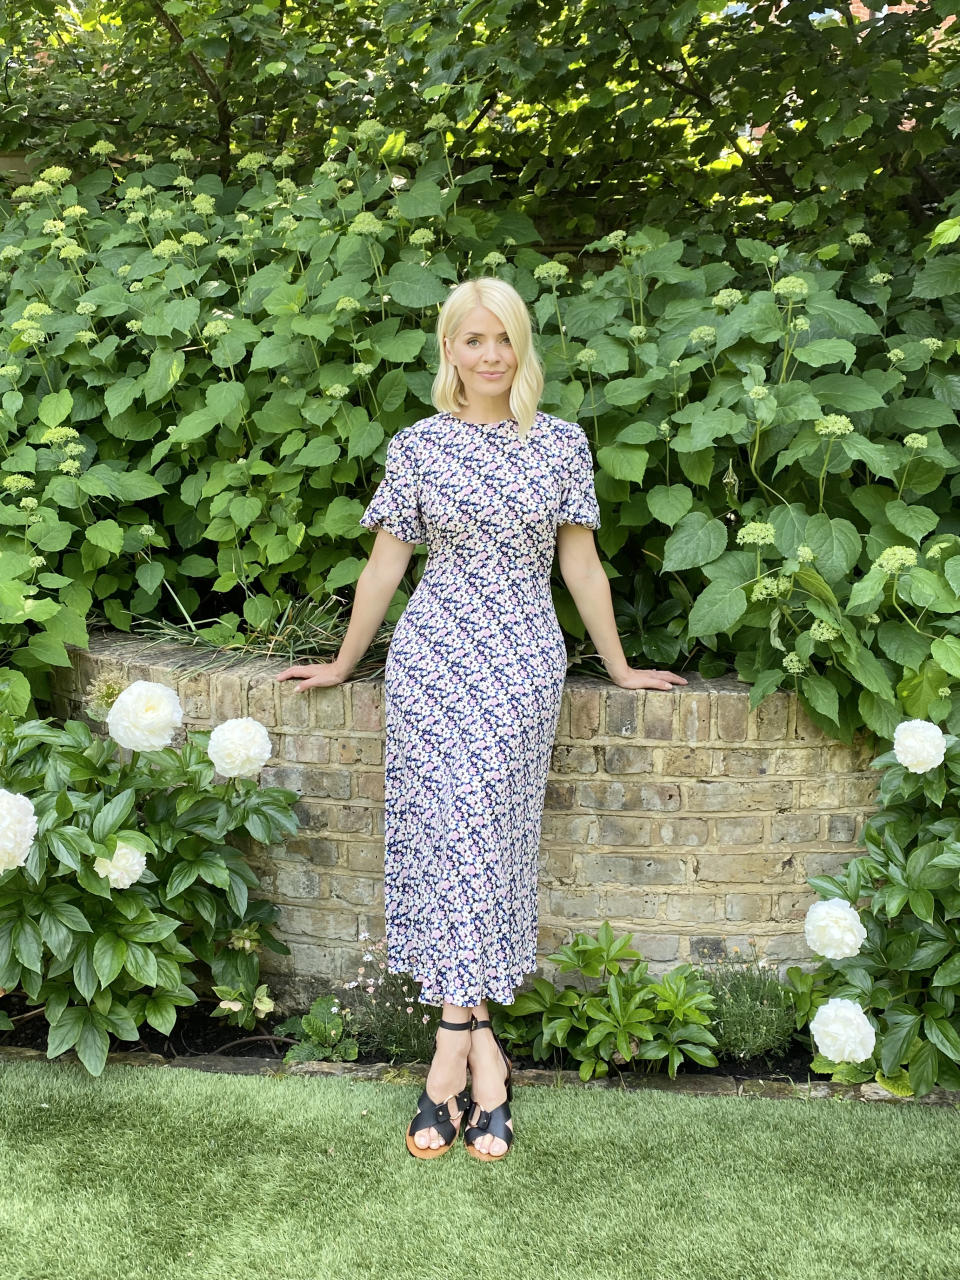 Snap up Holly's dress before it sells out again (Marks & Spencer)